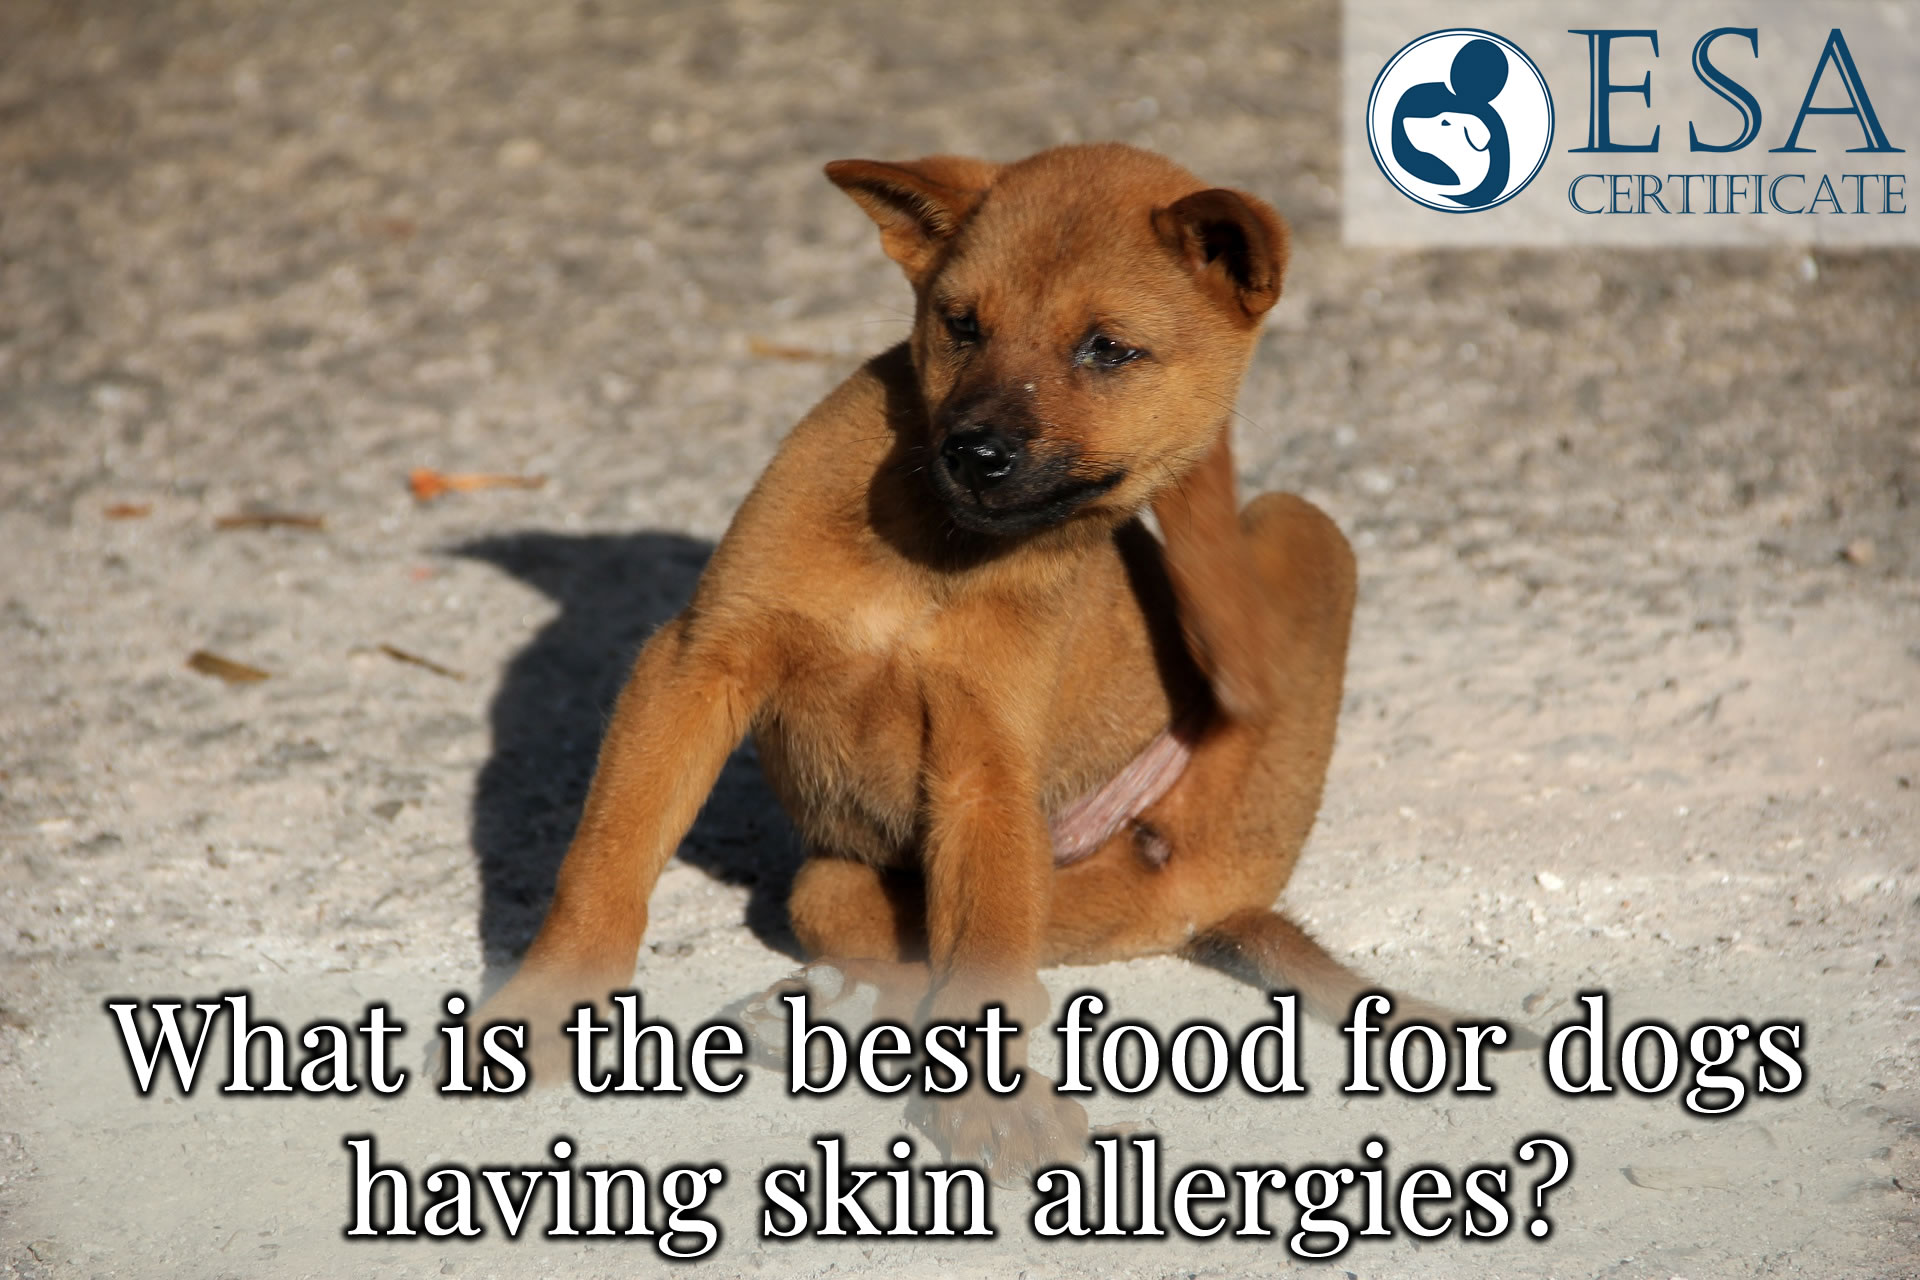 What is the best food for dogs having skin allergies